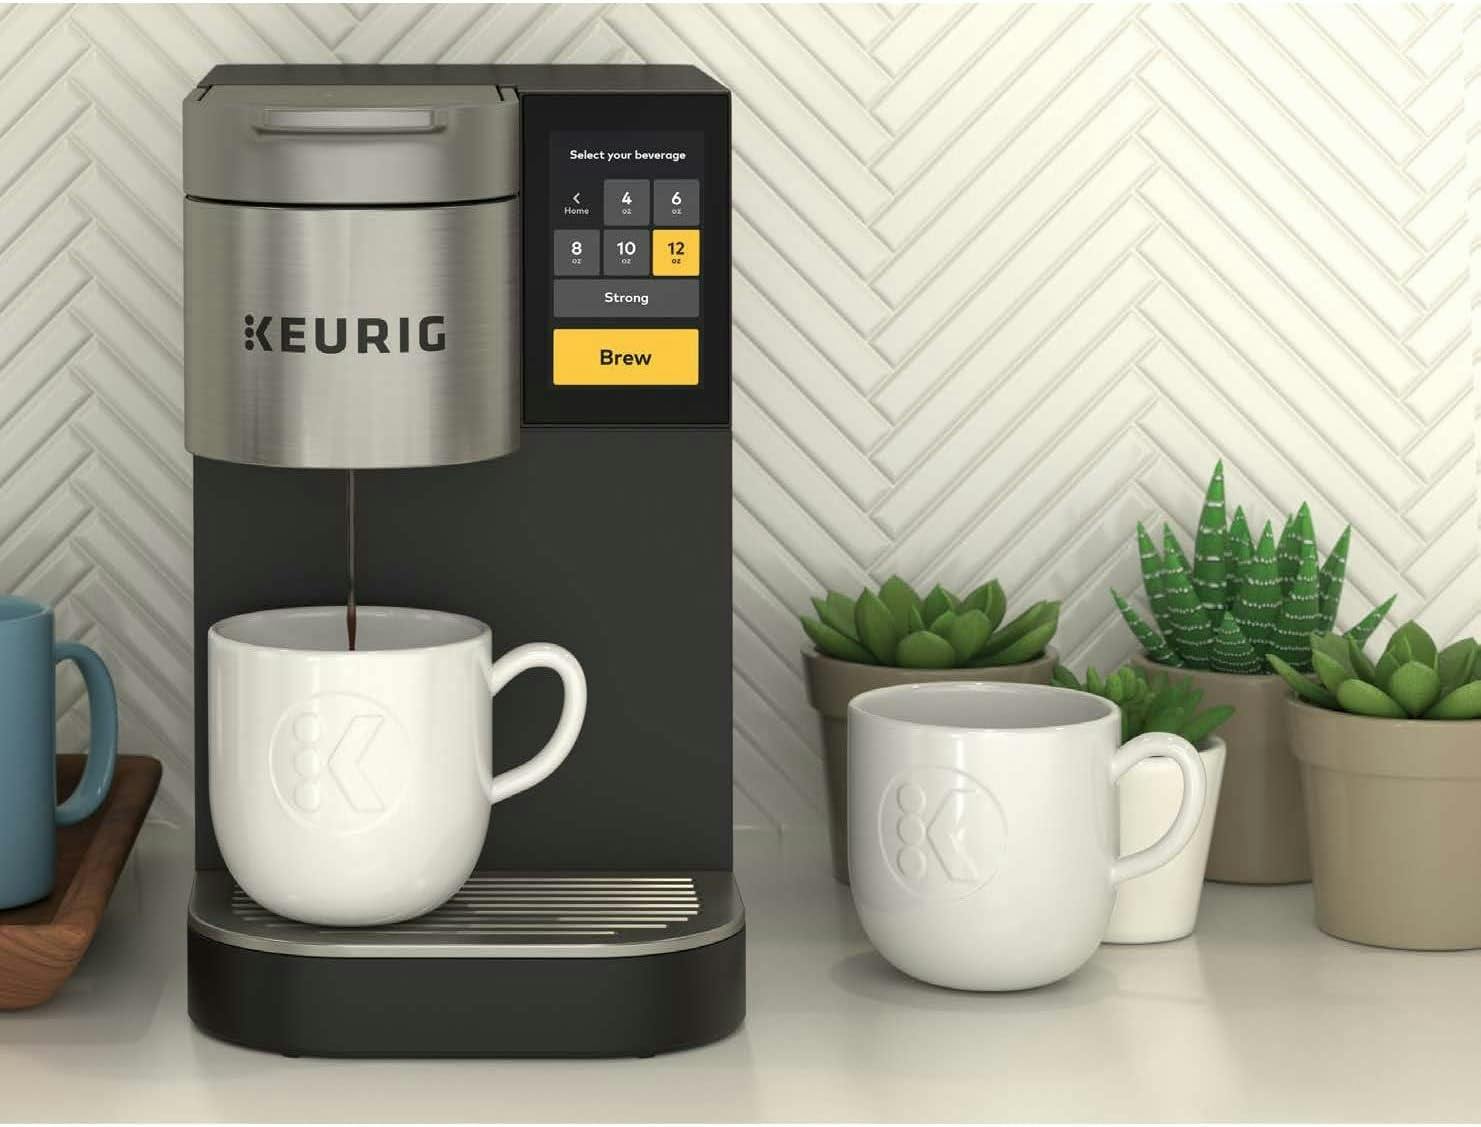 Modern Commercial 5-Cup Programmable Coffeemaker in Black and Silver